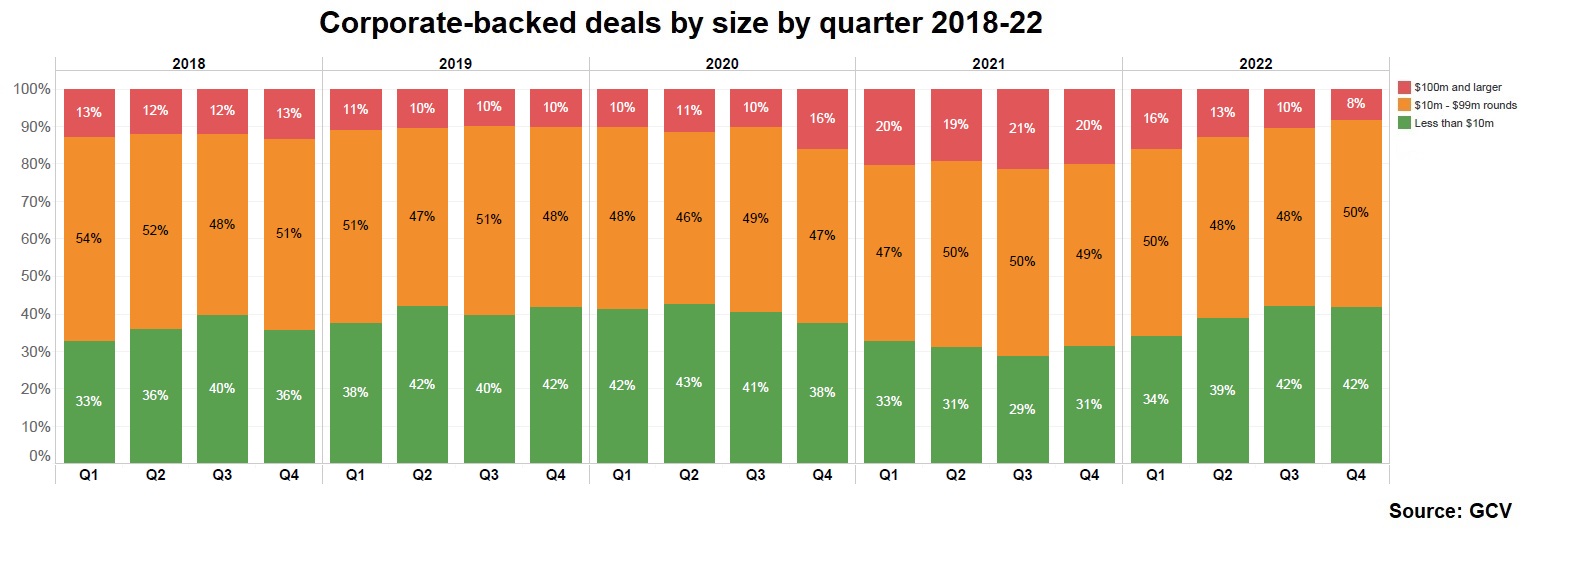 Chart showing corporate-backed deals by size by quarter 2018-22. Data by GCV